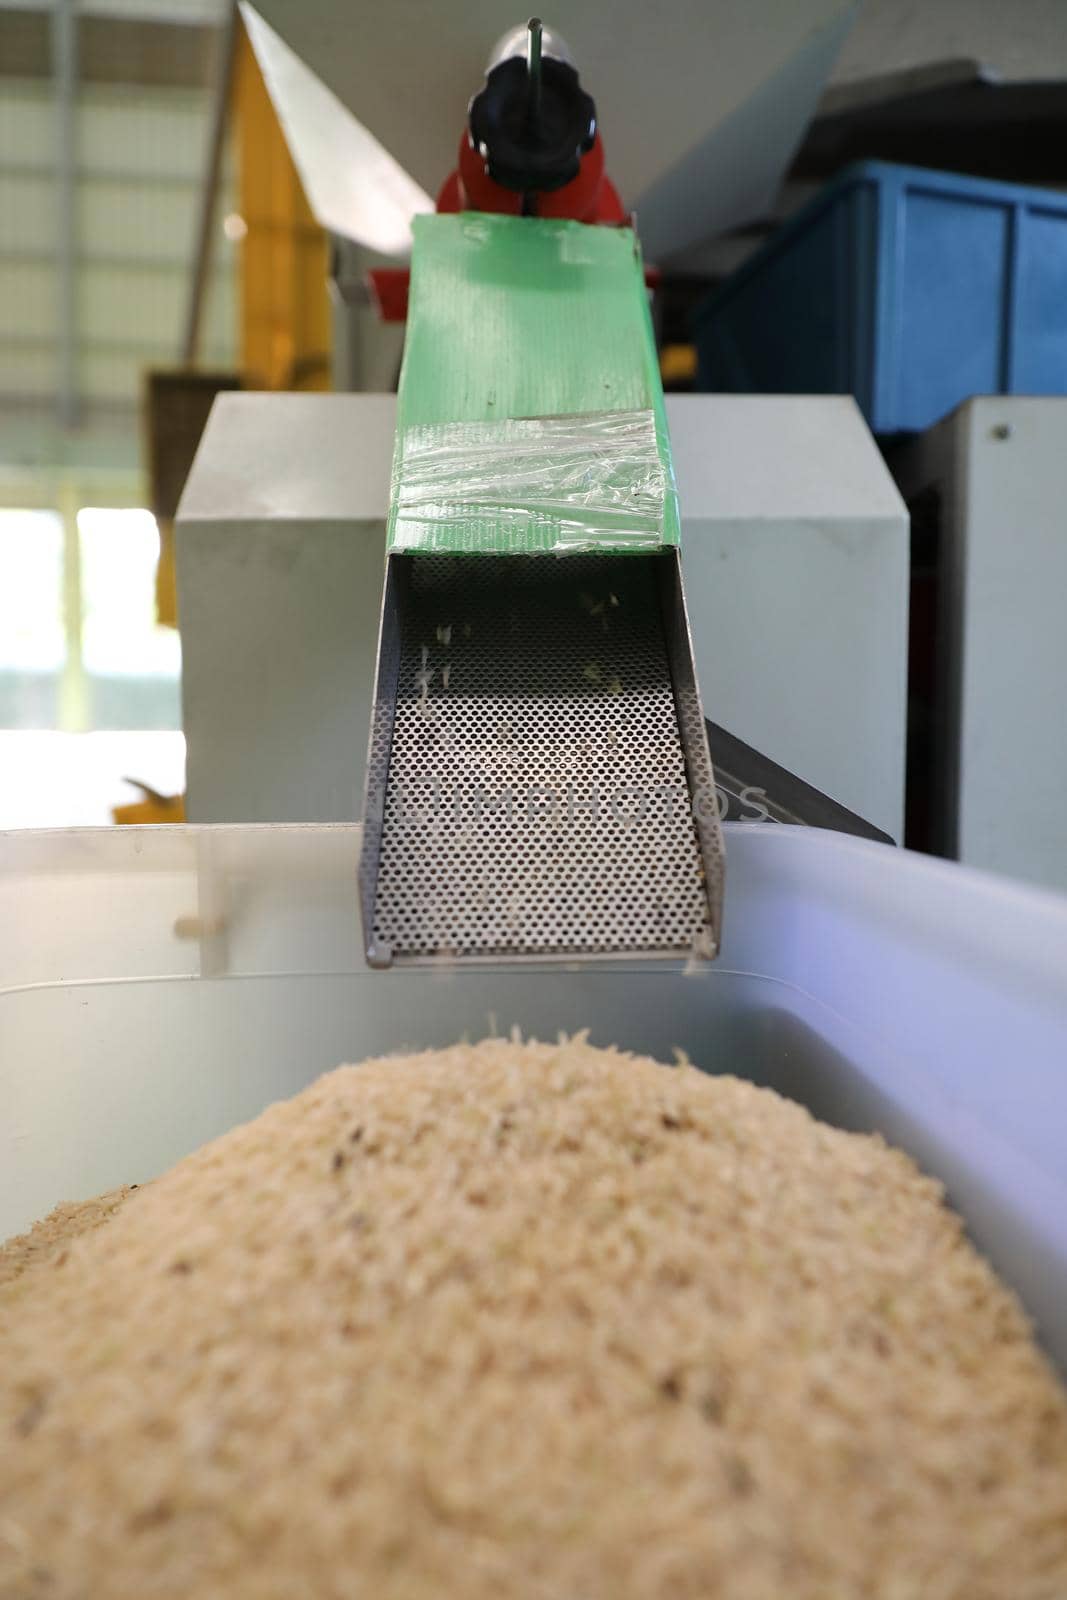 Factory machine Milling rice in close up by piyato